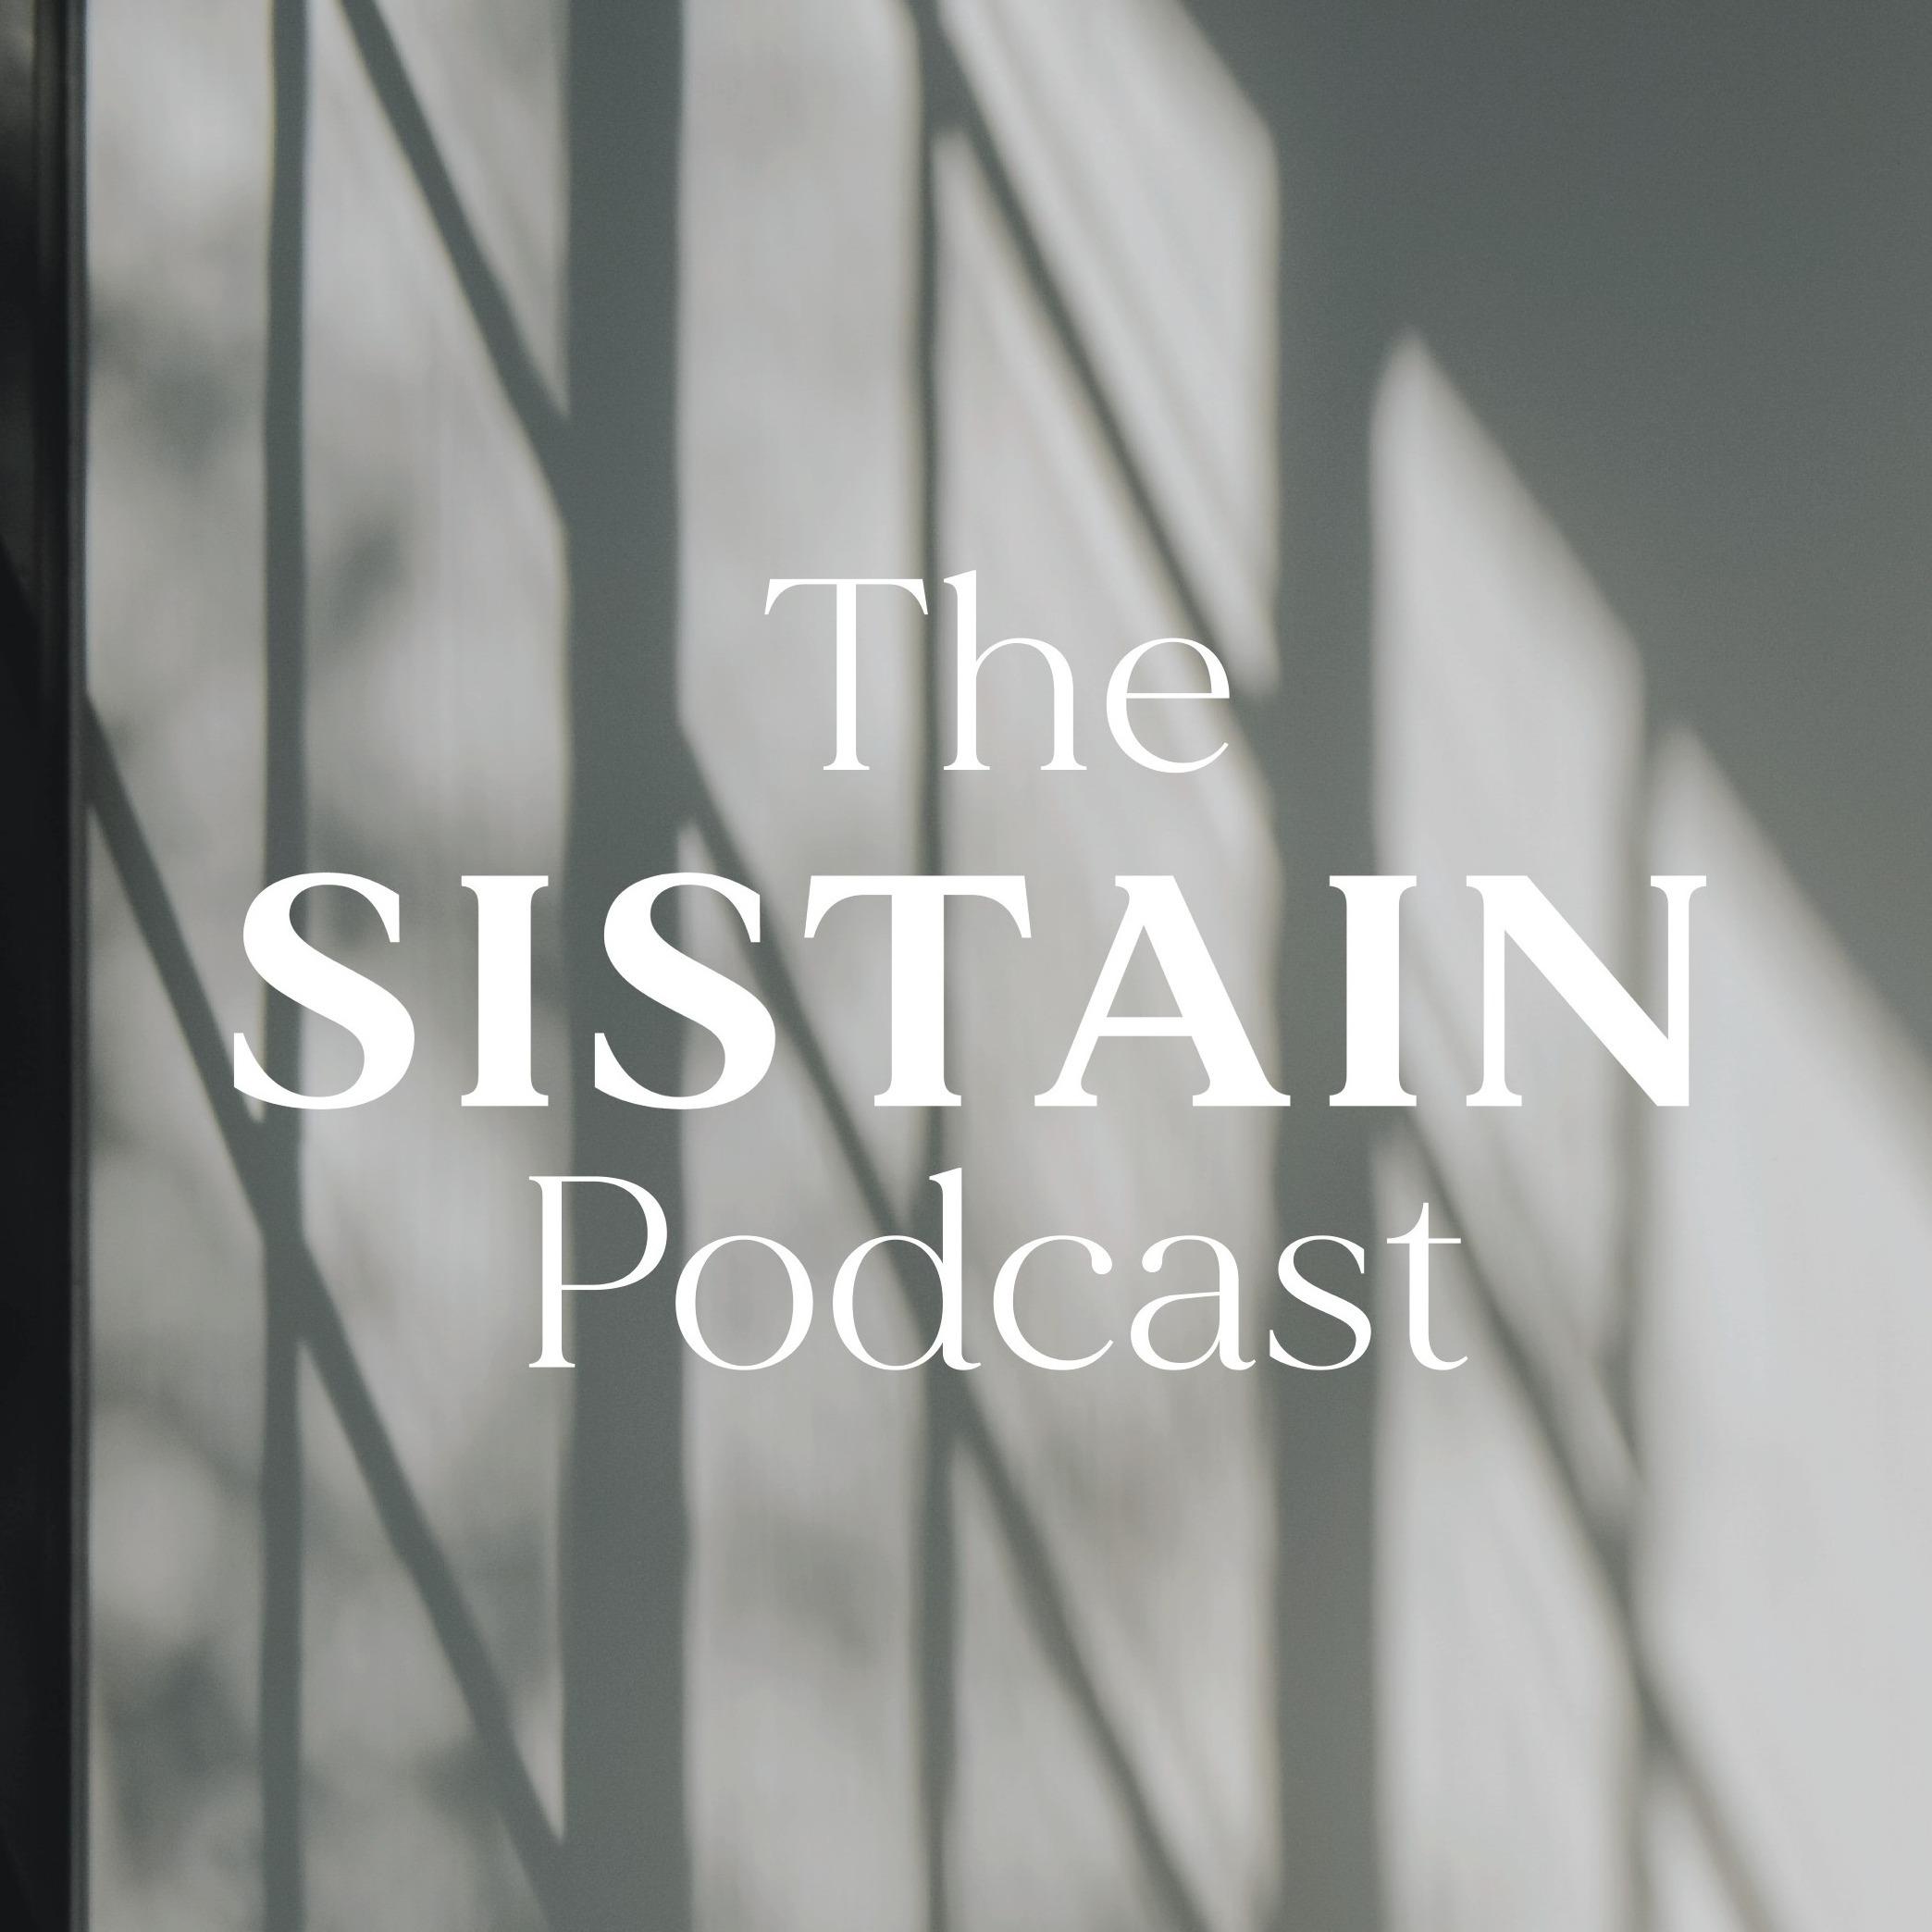 The SISTAIN Podcast